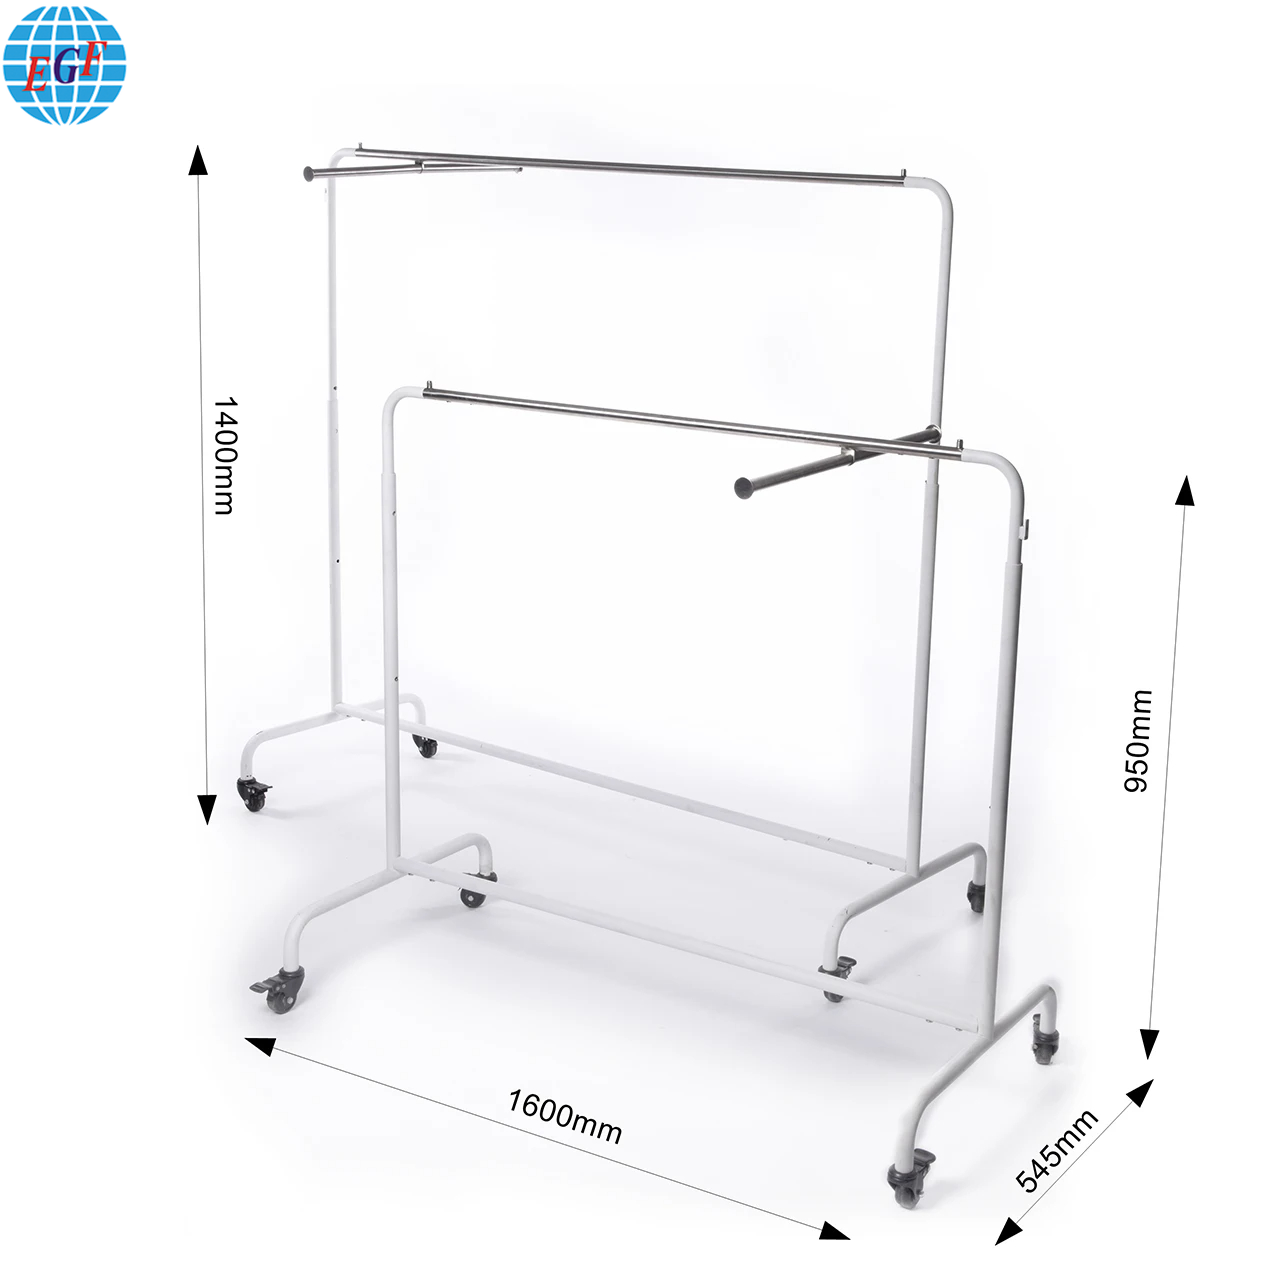 Hot Selling Clothing Display Racks Removable Garment Rack Cloth Hanging Rail For Clothes Retail Store